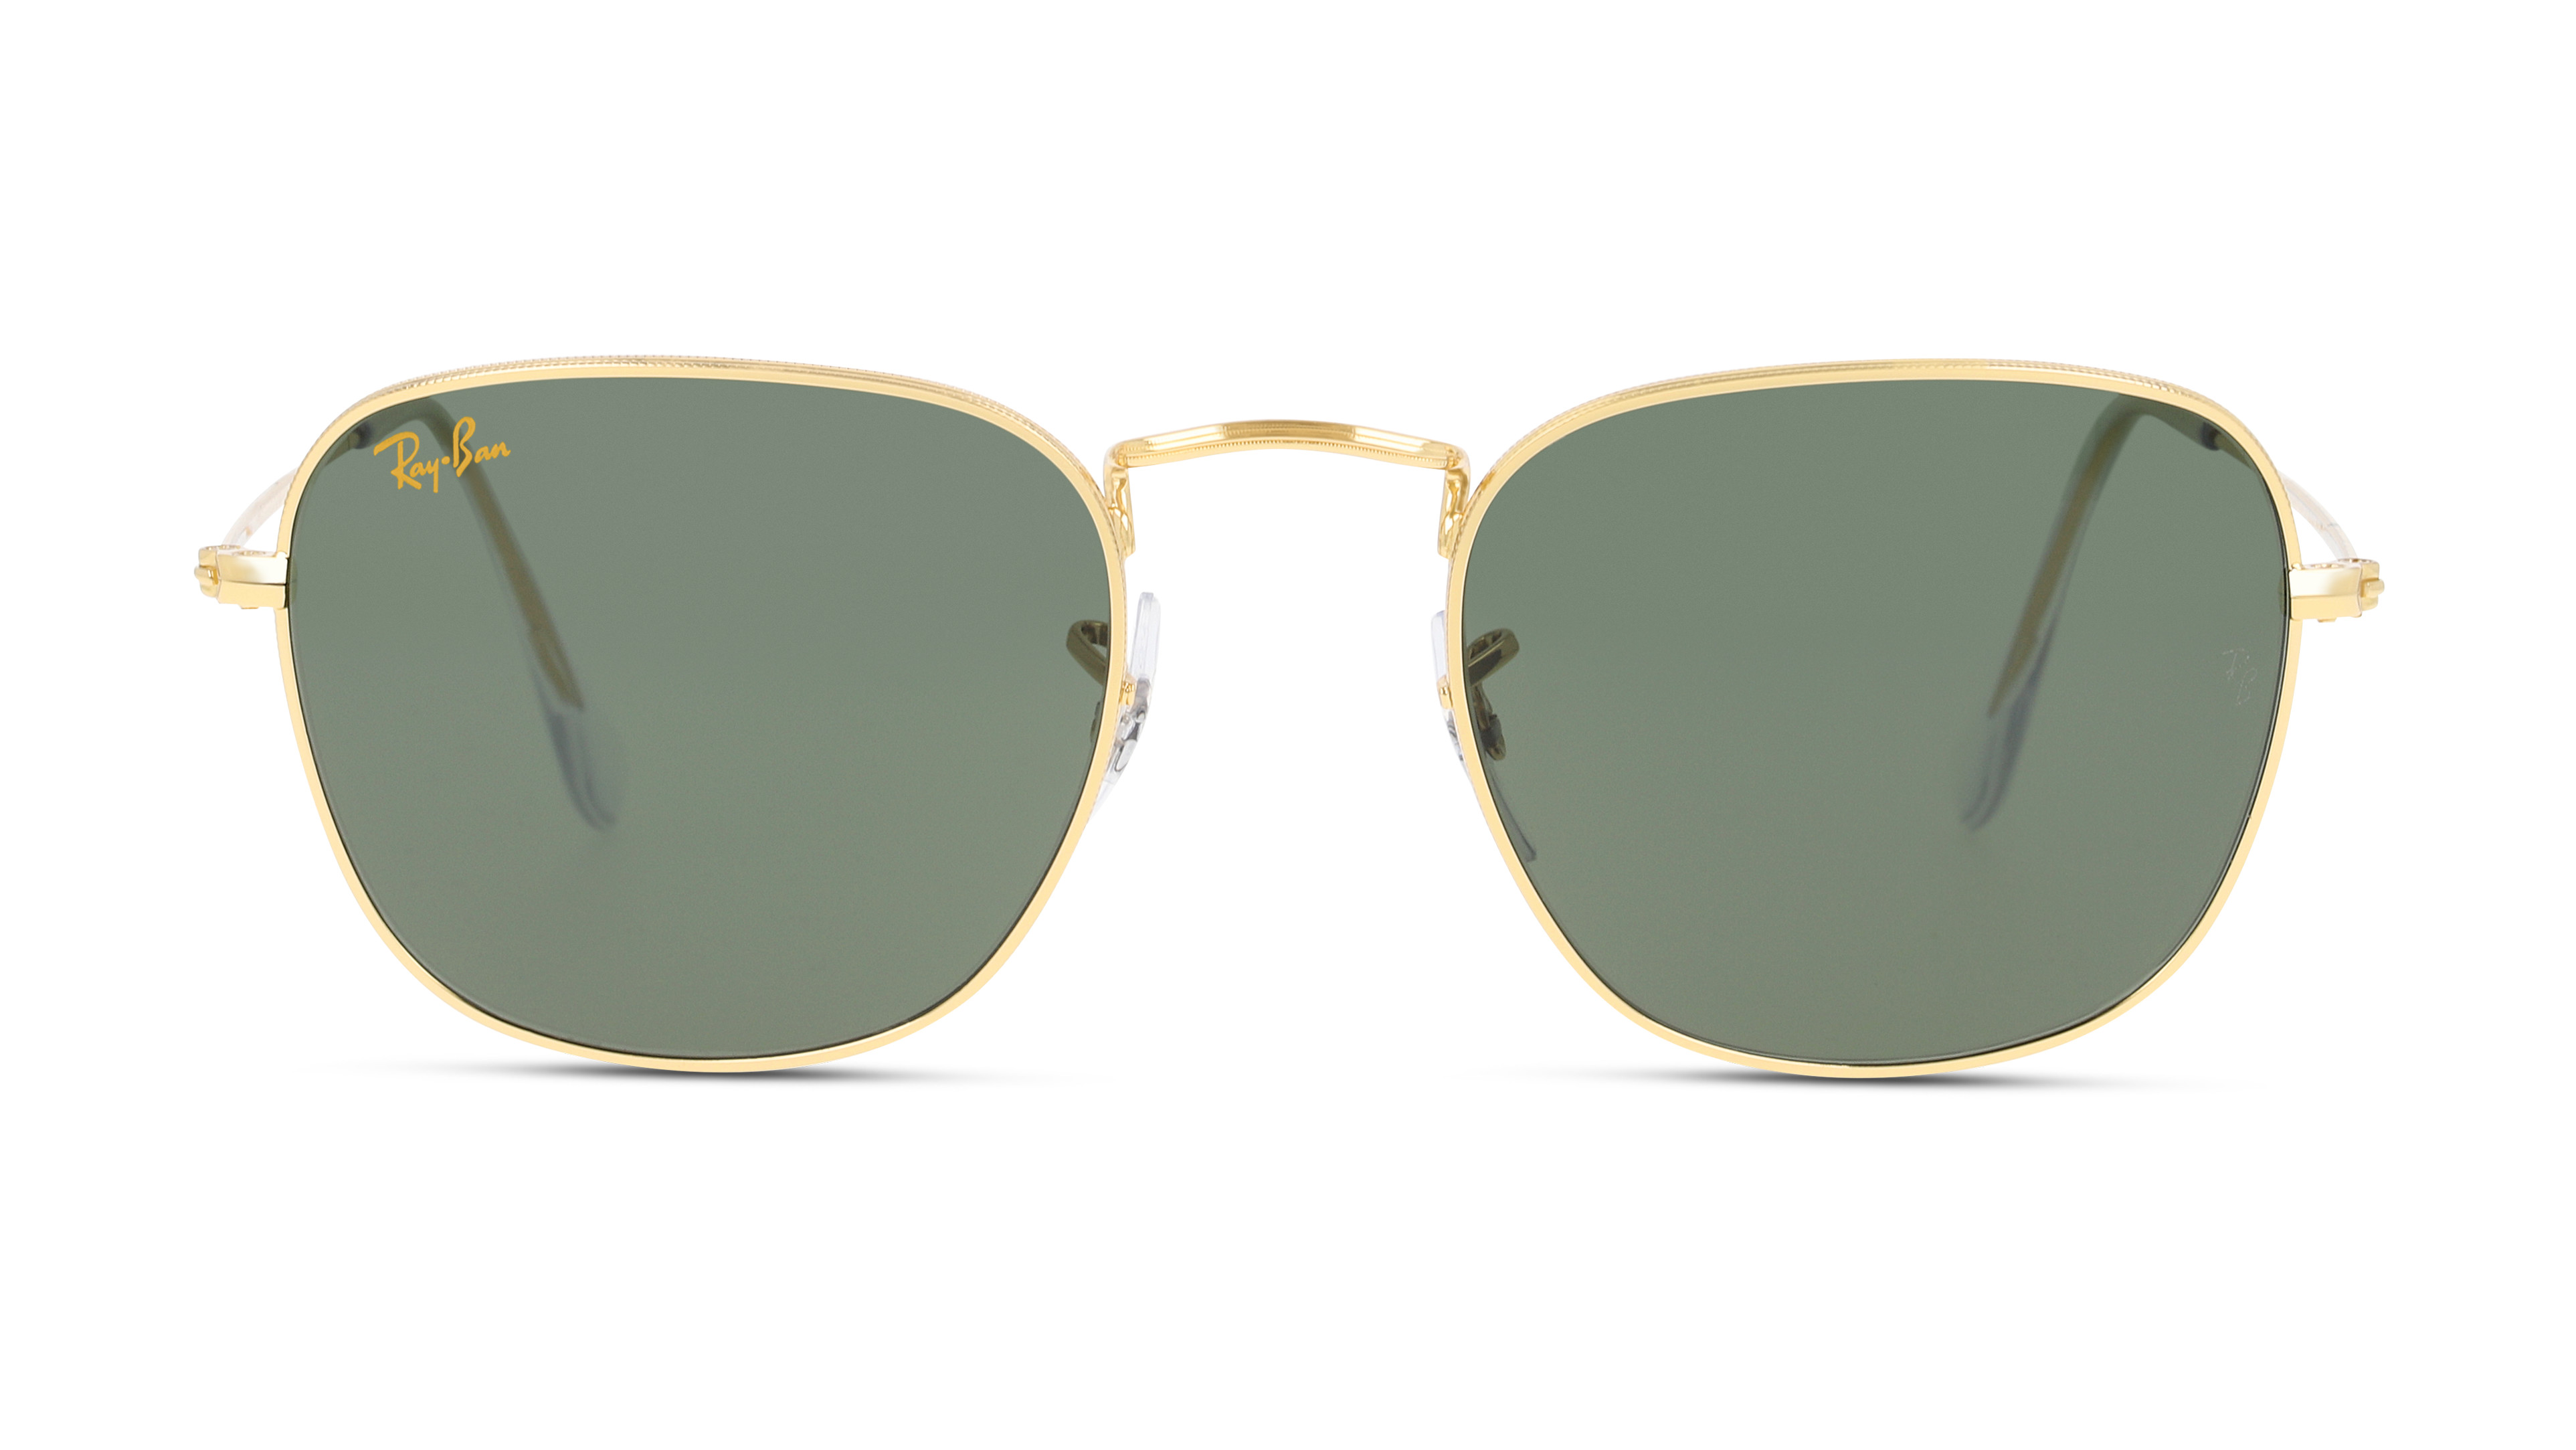 [products.image.front] Ray-Ban FRANK 0RB3857 919631 Sonnenbrille